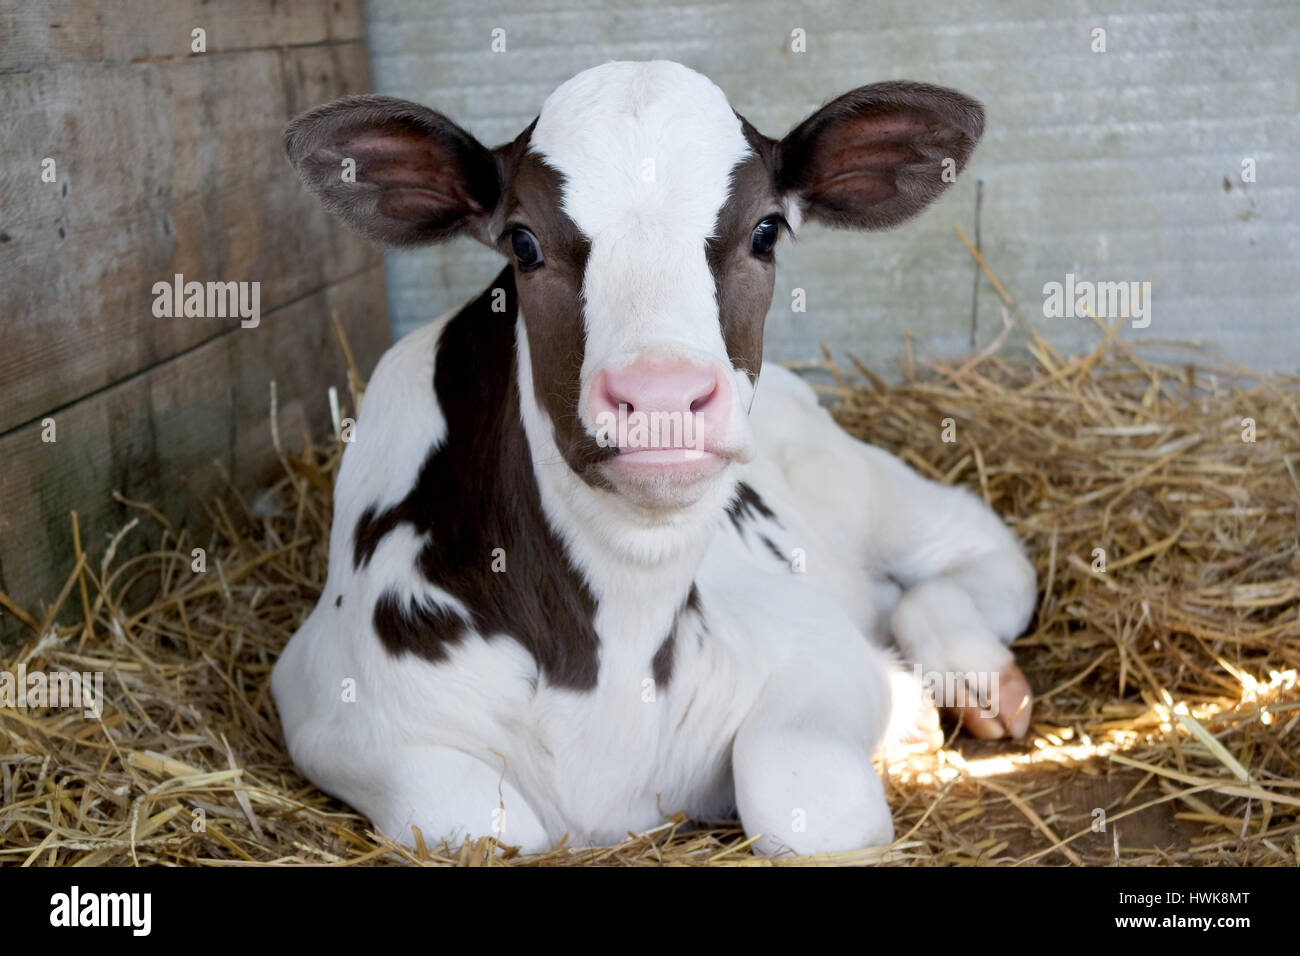 Baby cow calf in a cage Stock Photo - Alamy